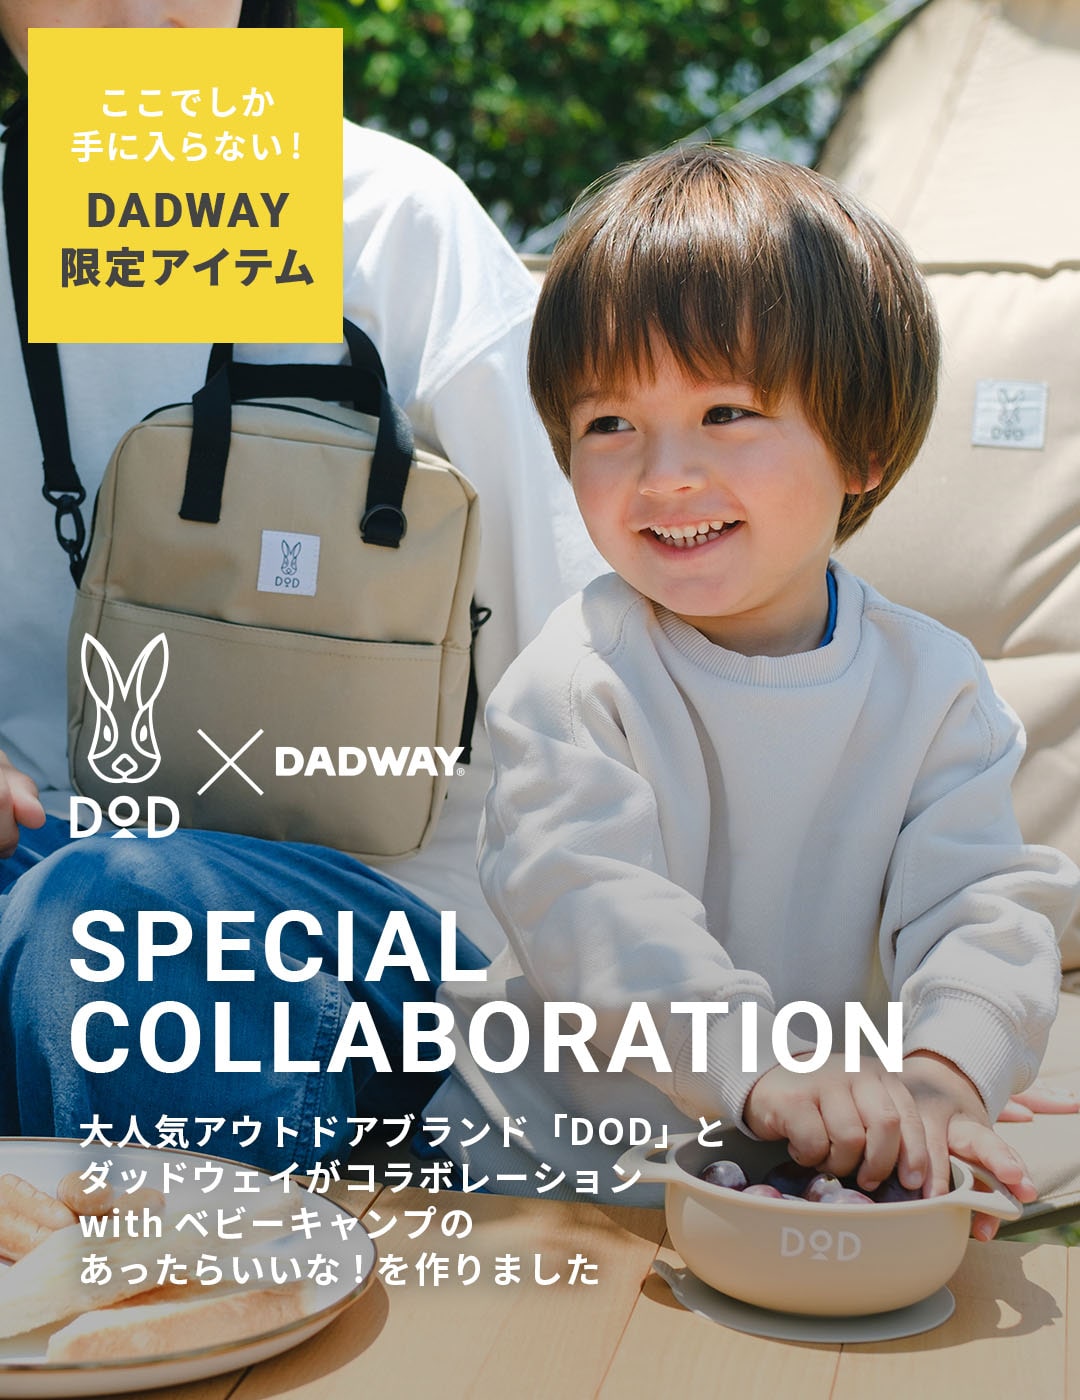 DOD×DADWAY SPECIAL COLLABORATION ここでしか手に入らない！DADWAY限定アイテム